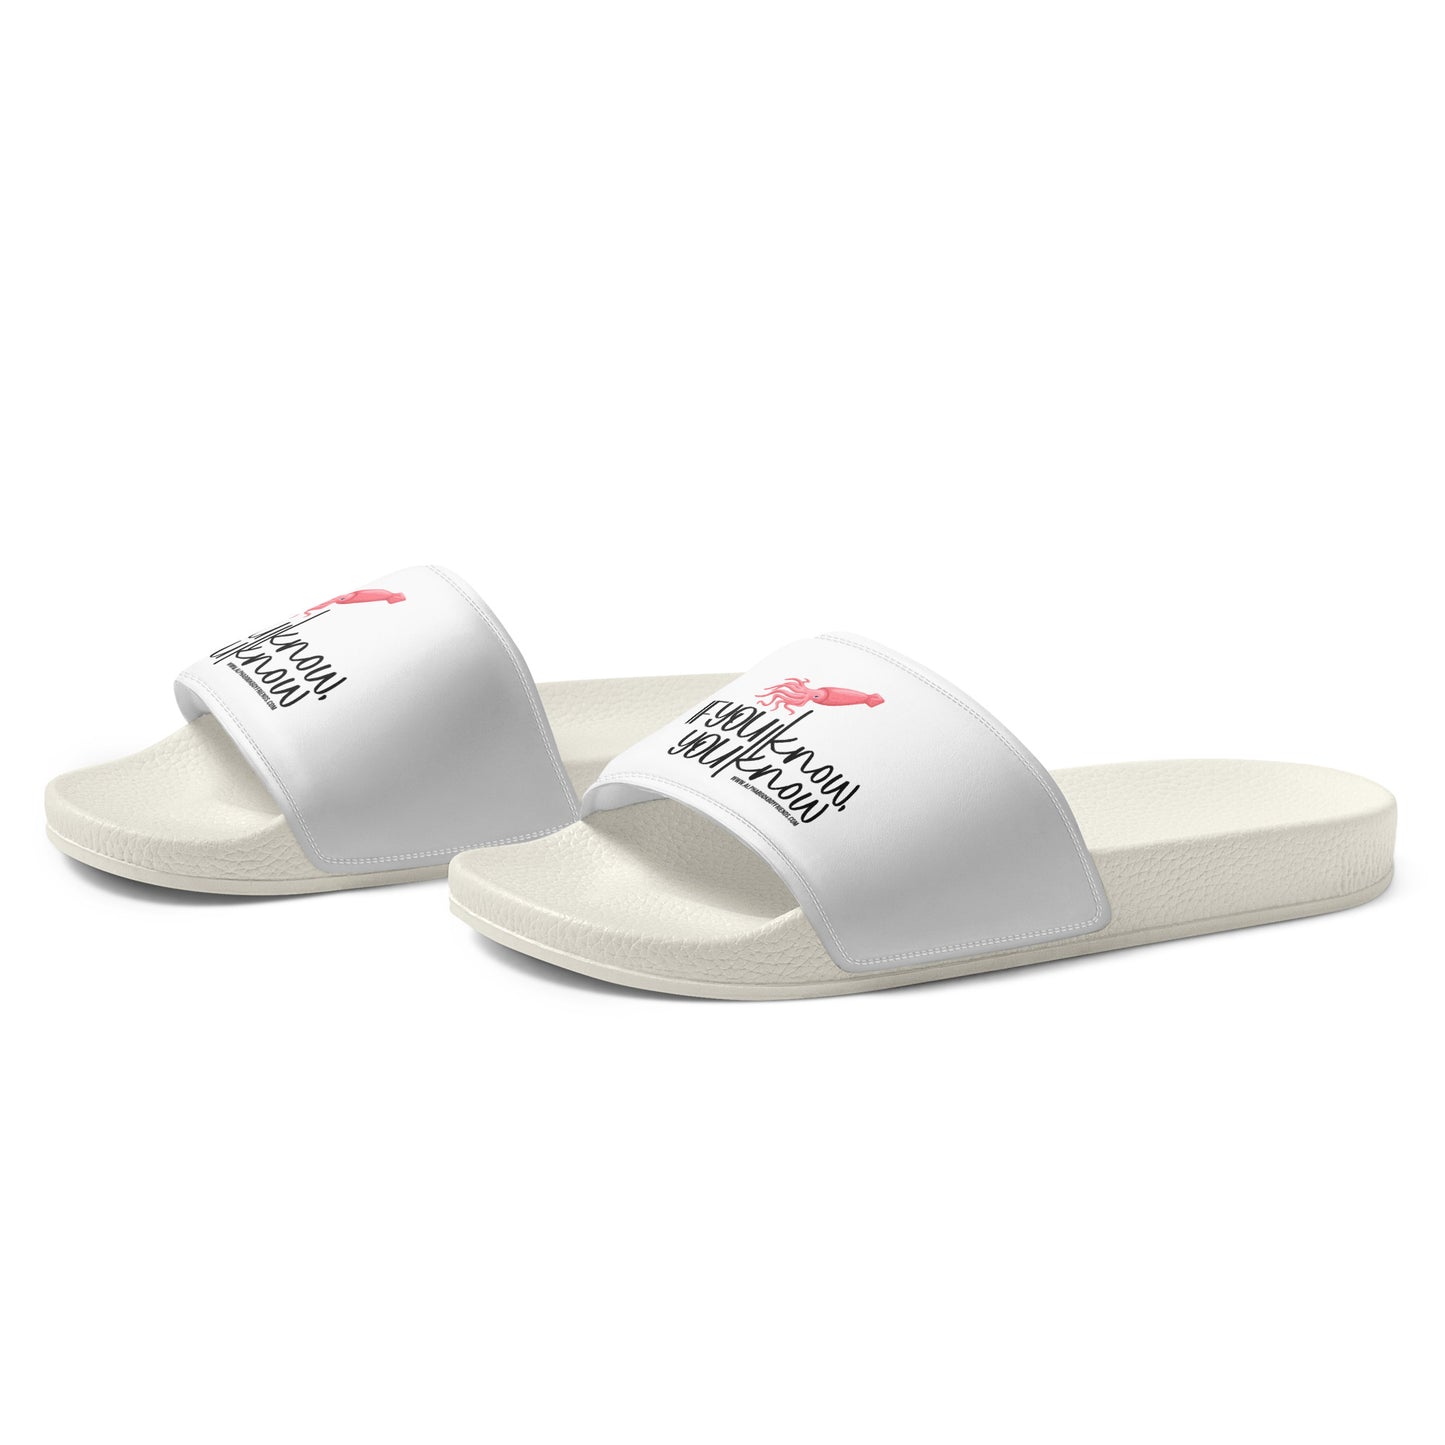 If you Know, You Know Women's slides